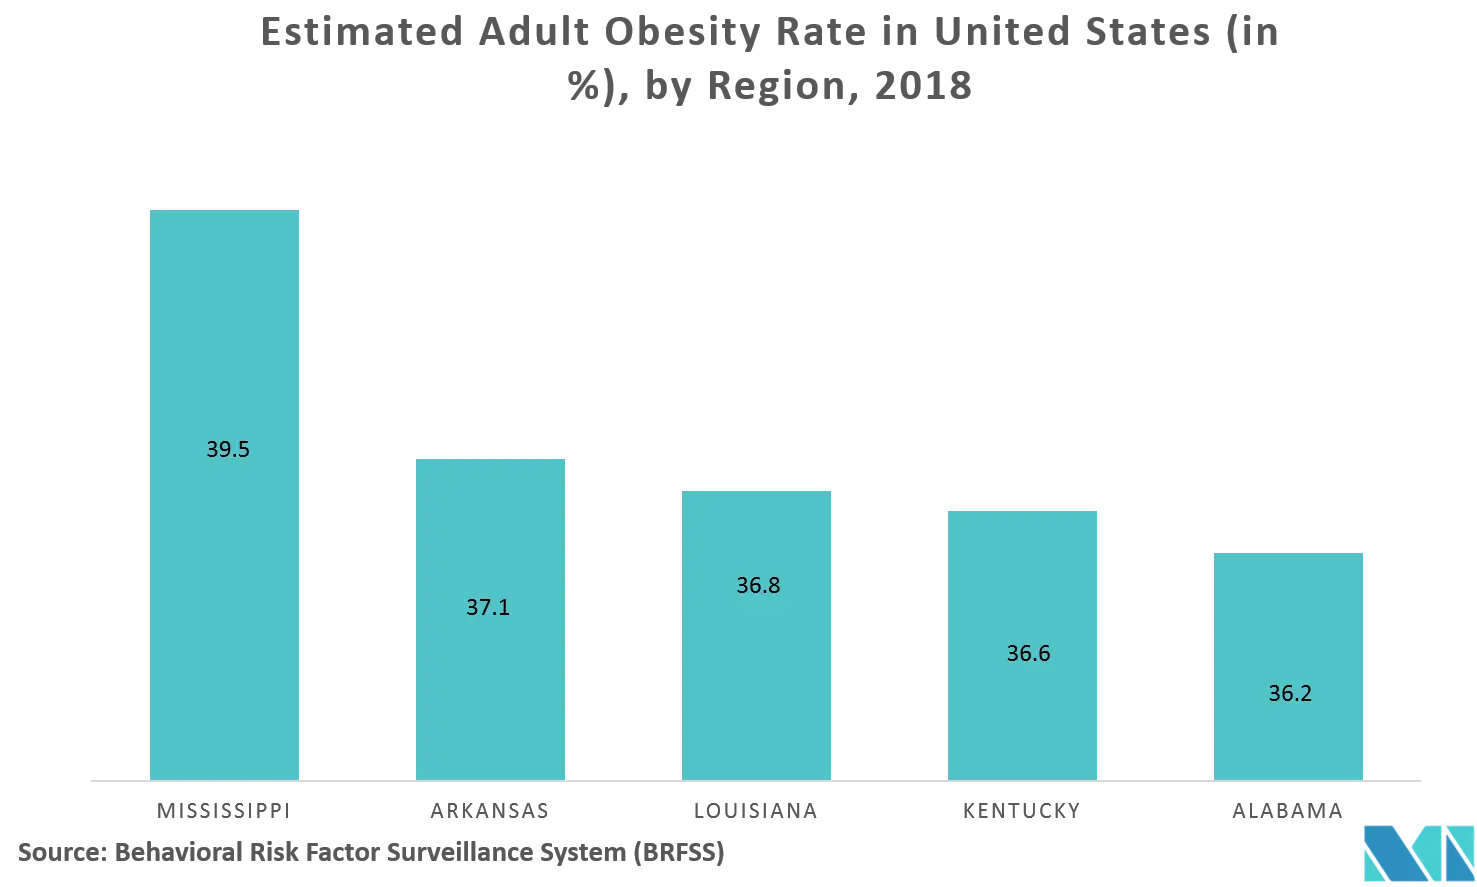 United States Bariatric key trend 1.png